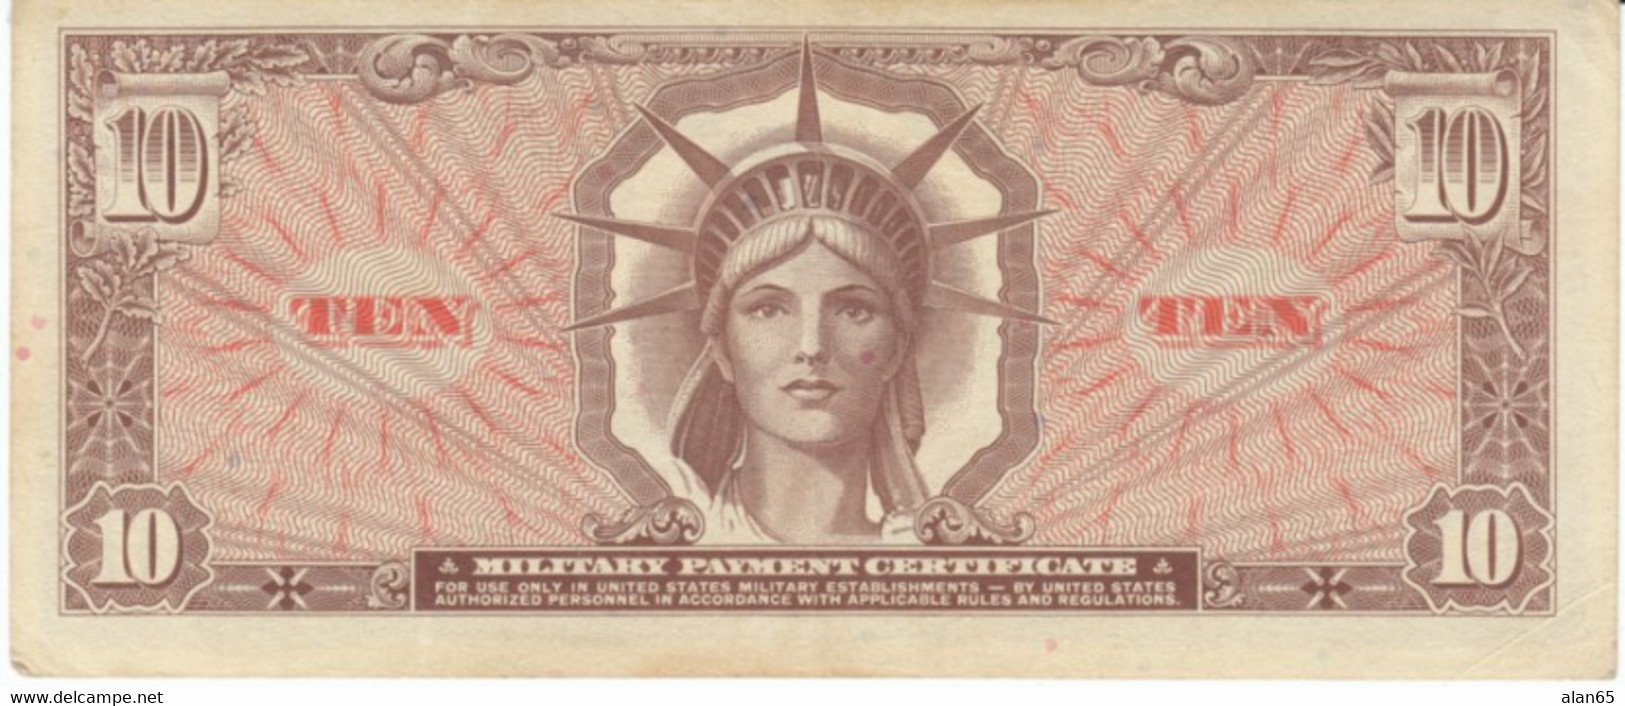 USA #M63, 10 Dollars 1965-68 Issue, Series 641 Military Payment Certificate - 1965-1968 - Series 641